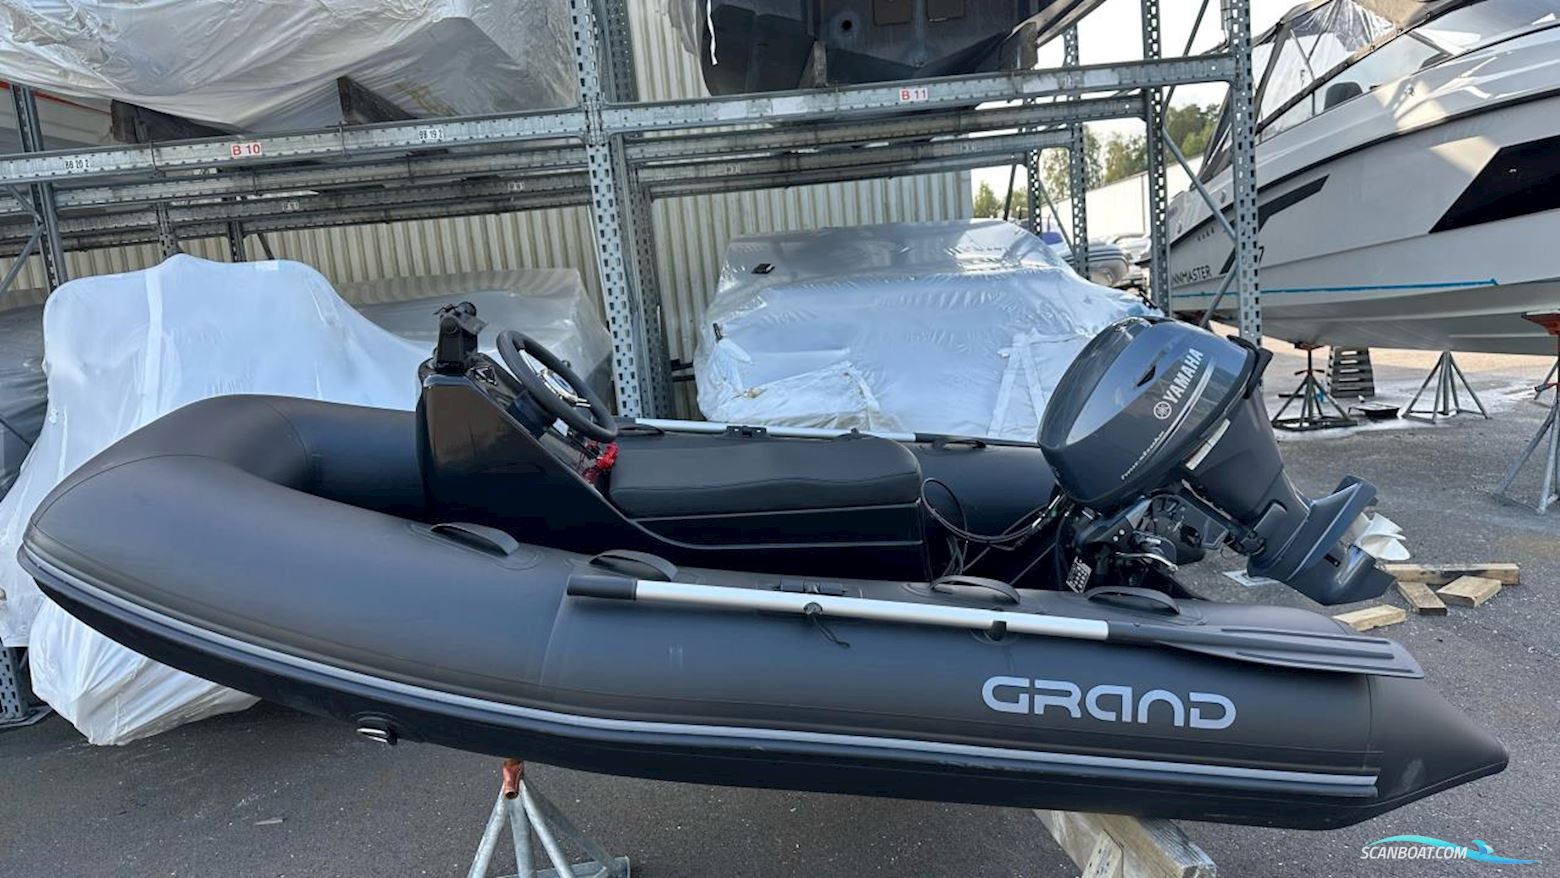 GRAND S300S Motor boat 2023, with Yamaha engine, Sweden